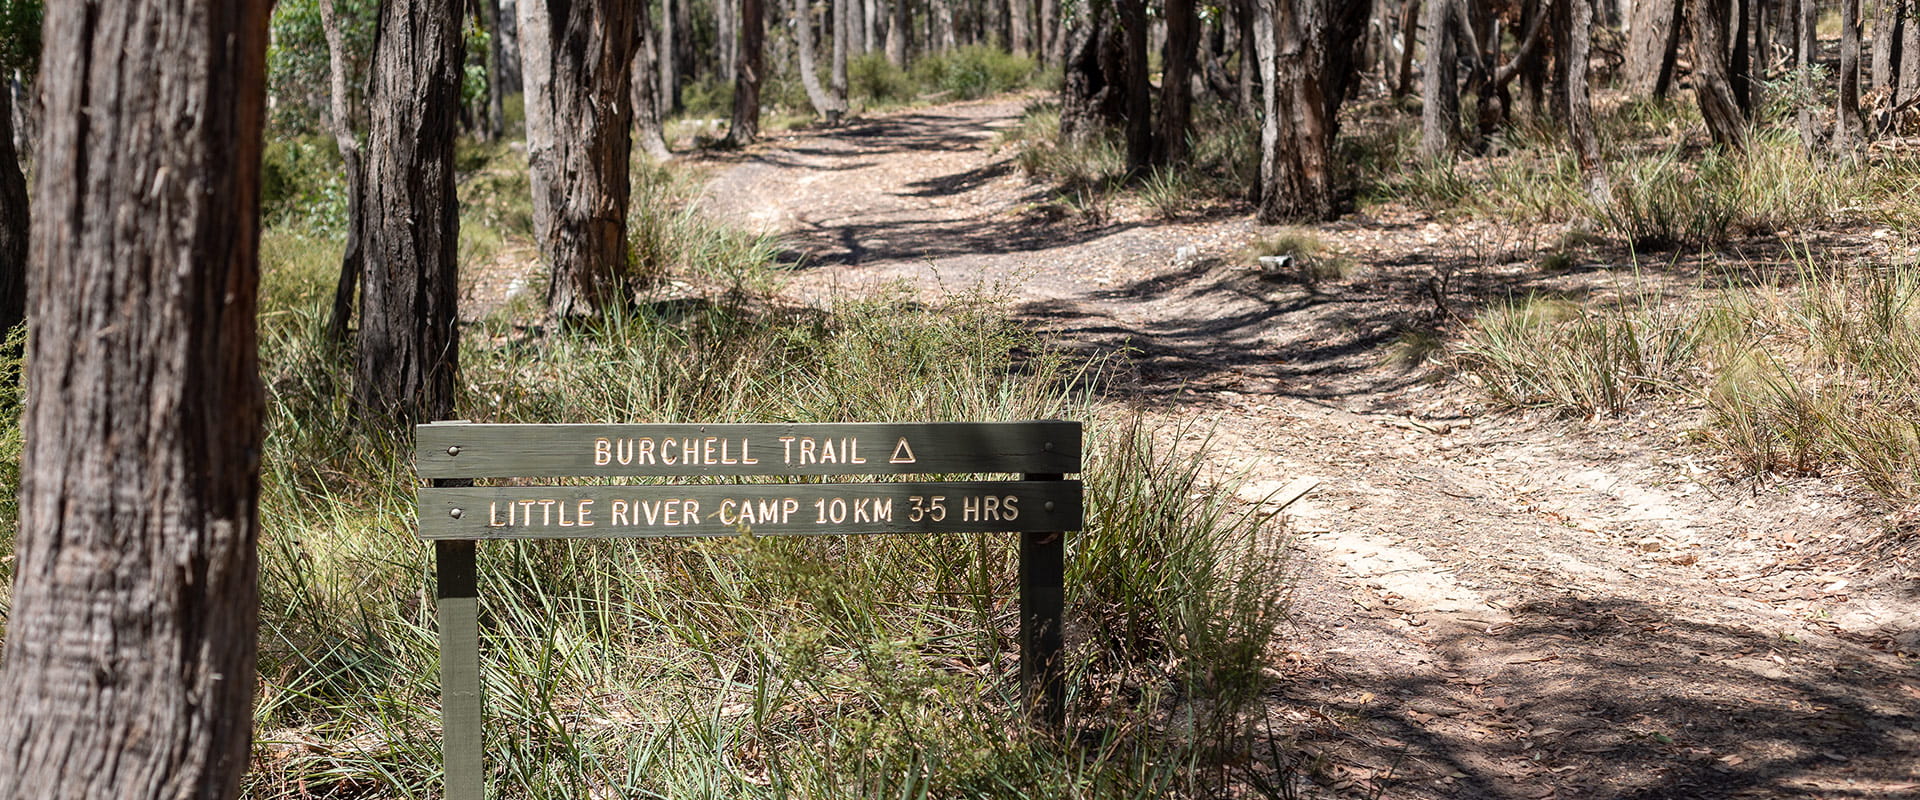 A trail head marker at the start of a trail indicates 10kms until Little River Camp